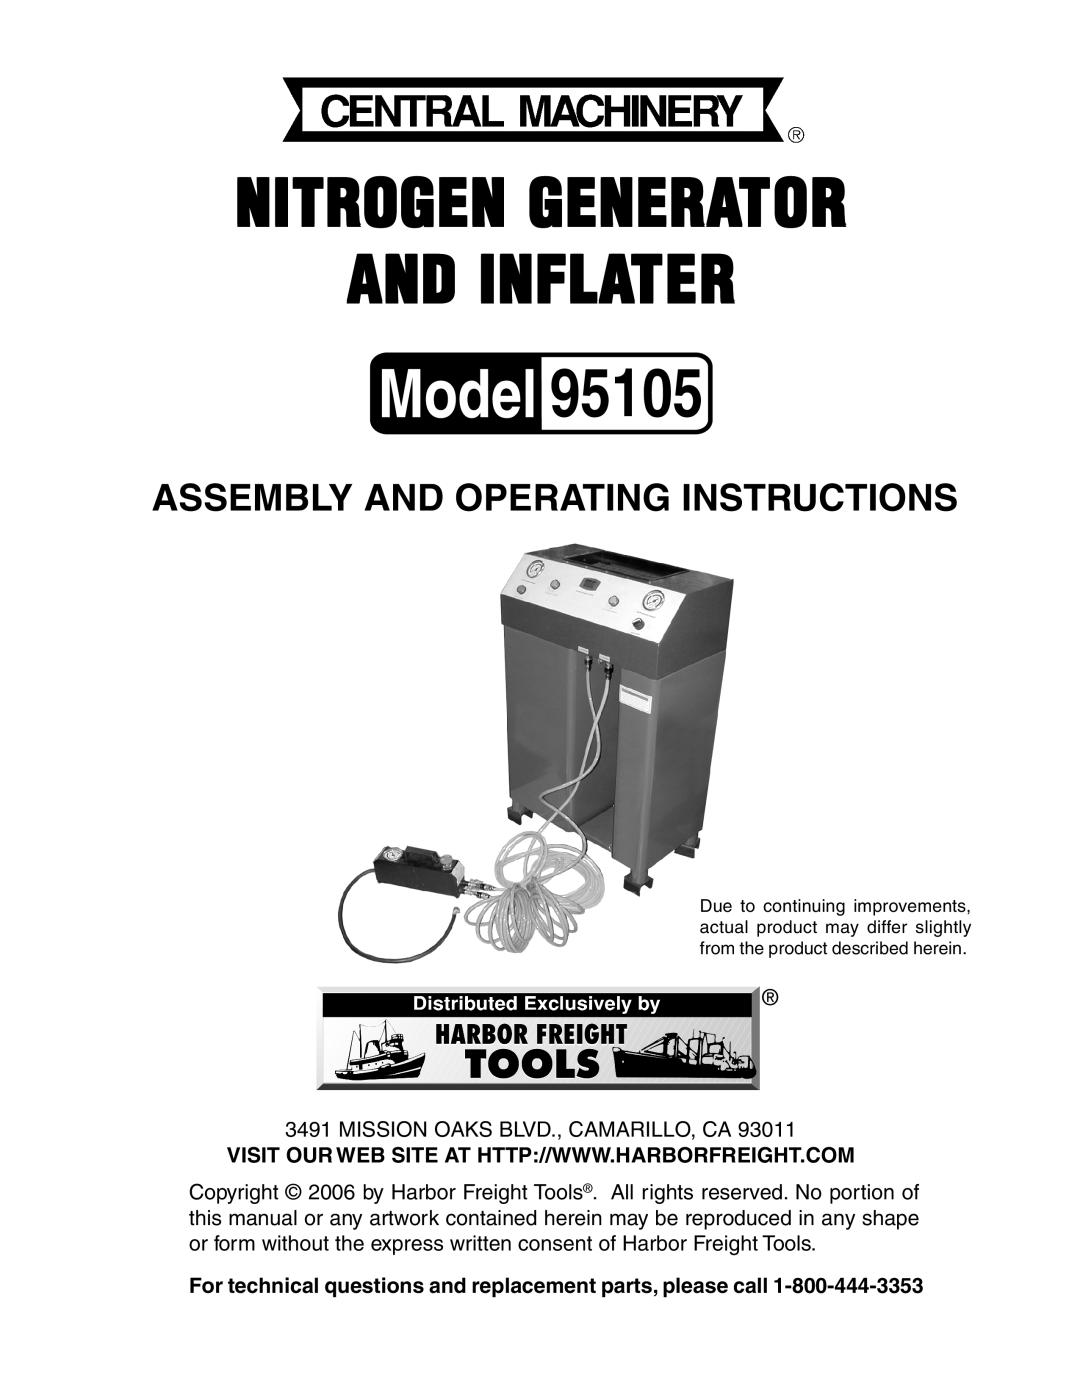 Harbor Freight Tools 95105 manual Nitrogen Generator And Inflater, Assembly And Operating Instructions 